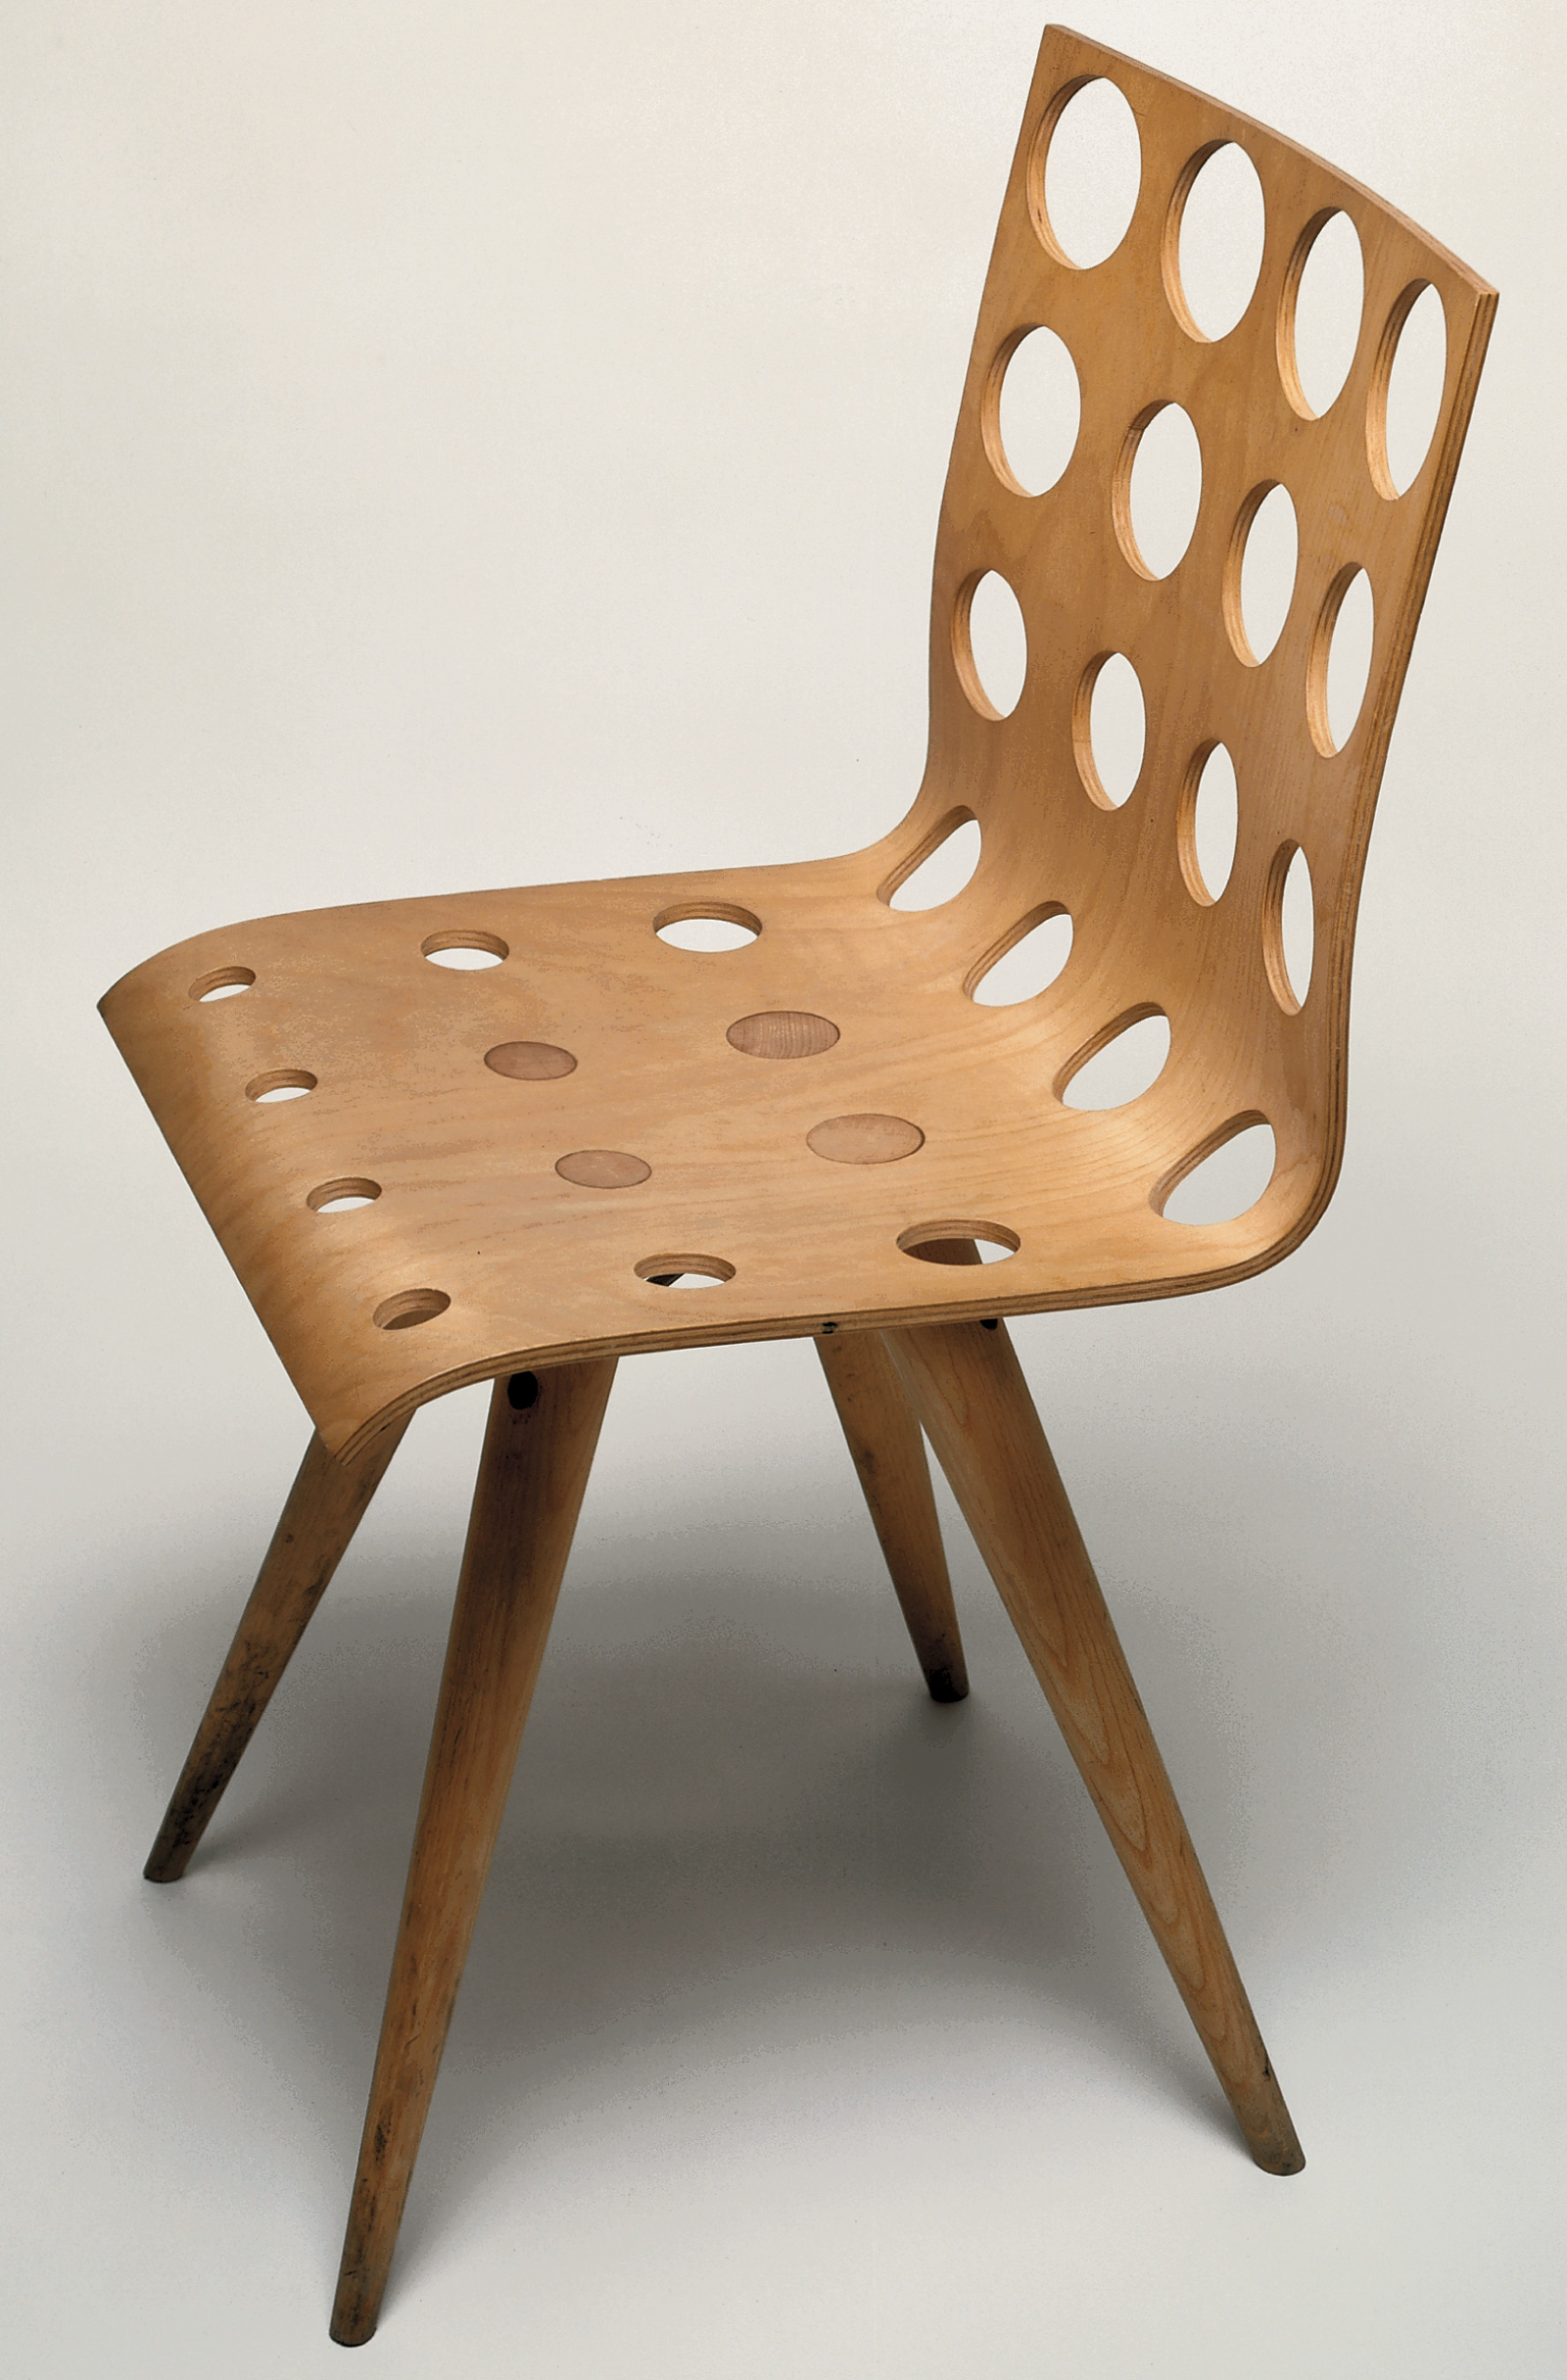 Chair with Holes (no. 2)